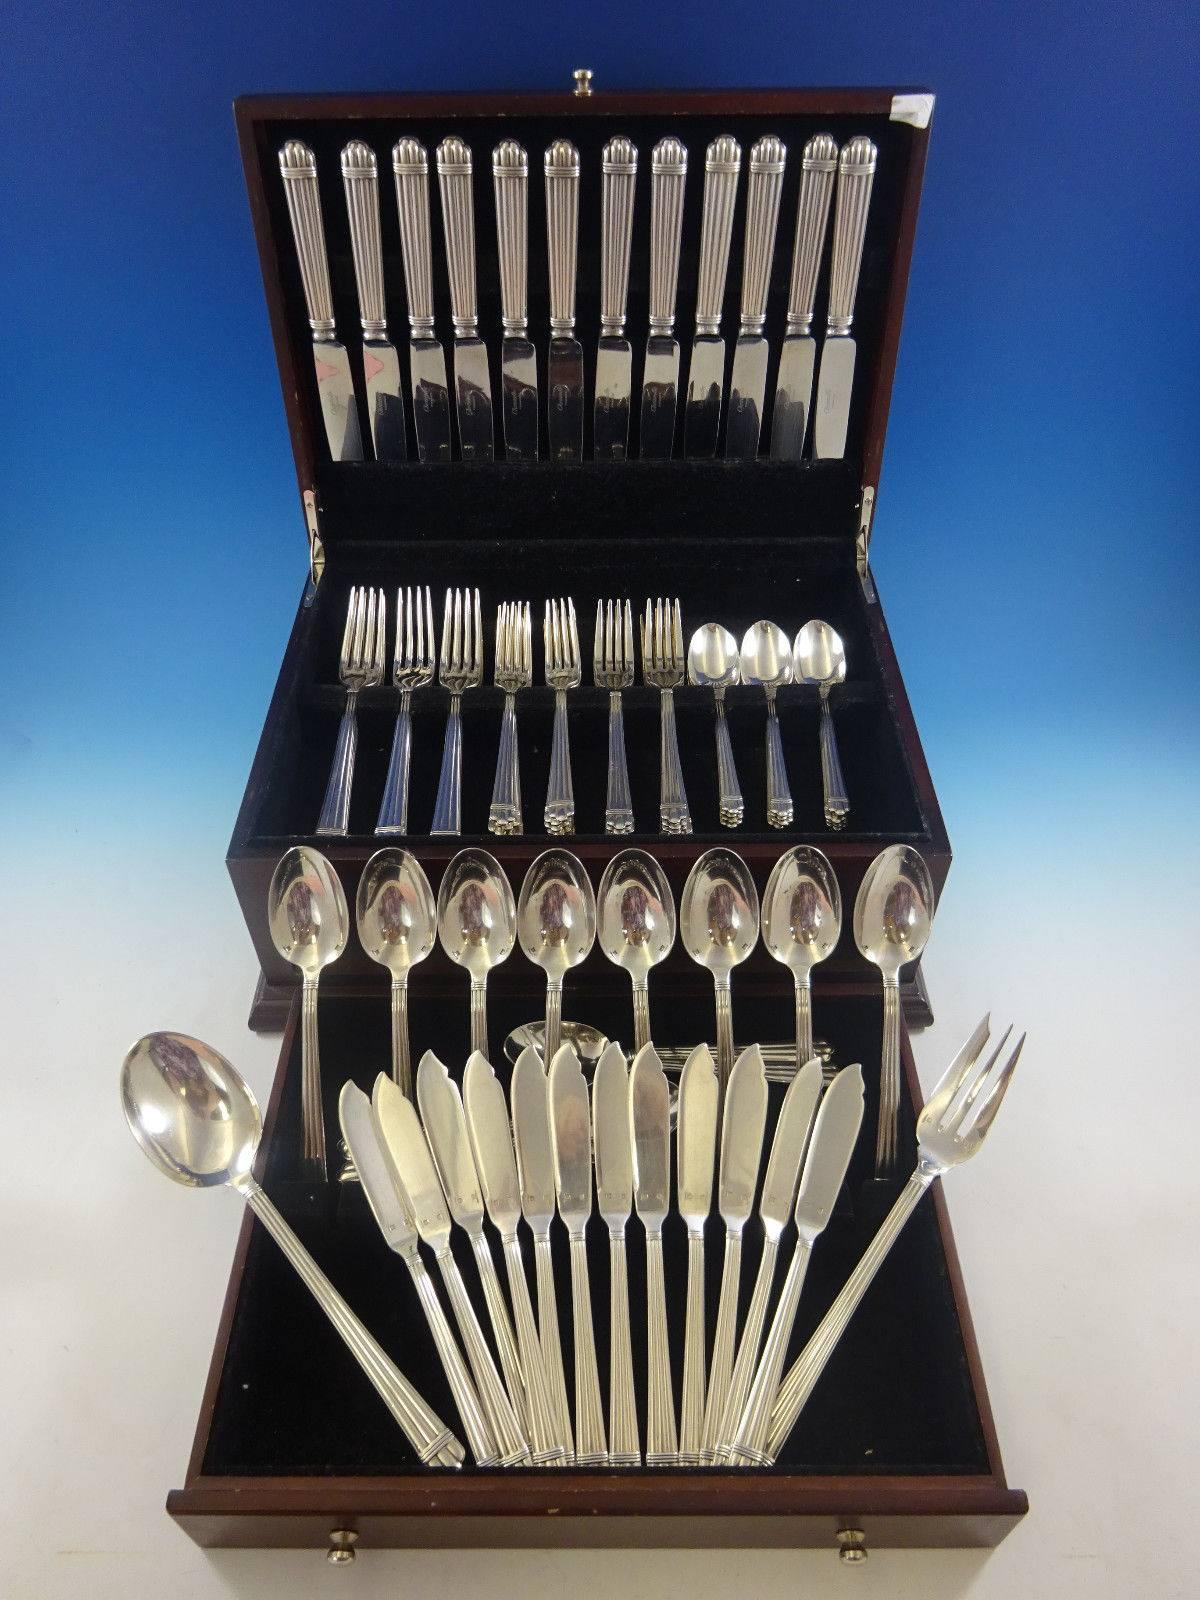 
With a dedication to perfection and quality, Christofle flatware creations unite craftsmanship and modern technique, resulting in flatware to be handed down through generations. Aria is a reinterpretation of an ancient motif featuring ringed